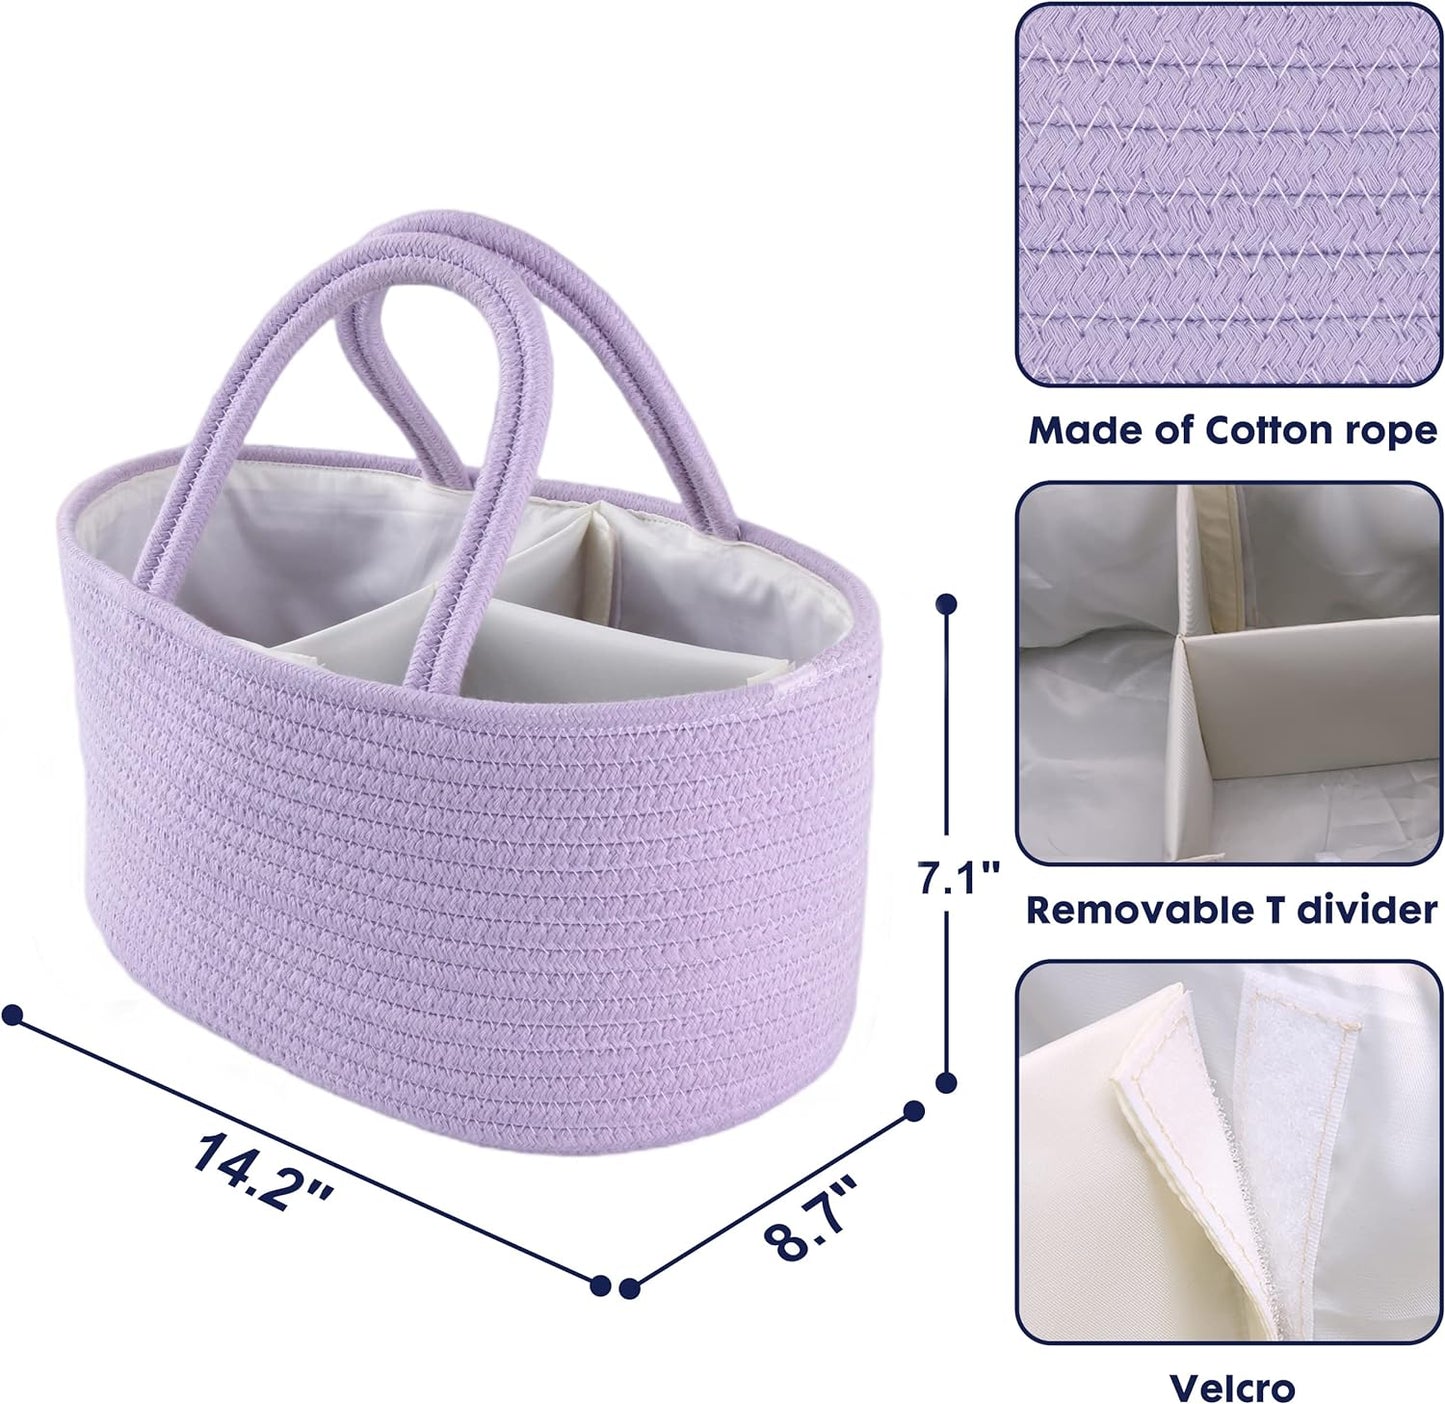 Baby Diaper Caddy Organizer for Girl Boy Cotton Rope Nursery Storage Bin Basket Portable Holder Tote Bag for Changing Table Car Travel Baby Shower Gifts Newborn Registry Must Have Items oatmeal